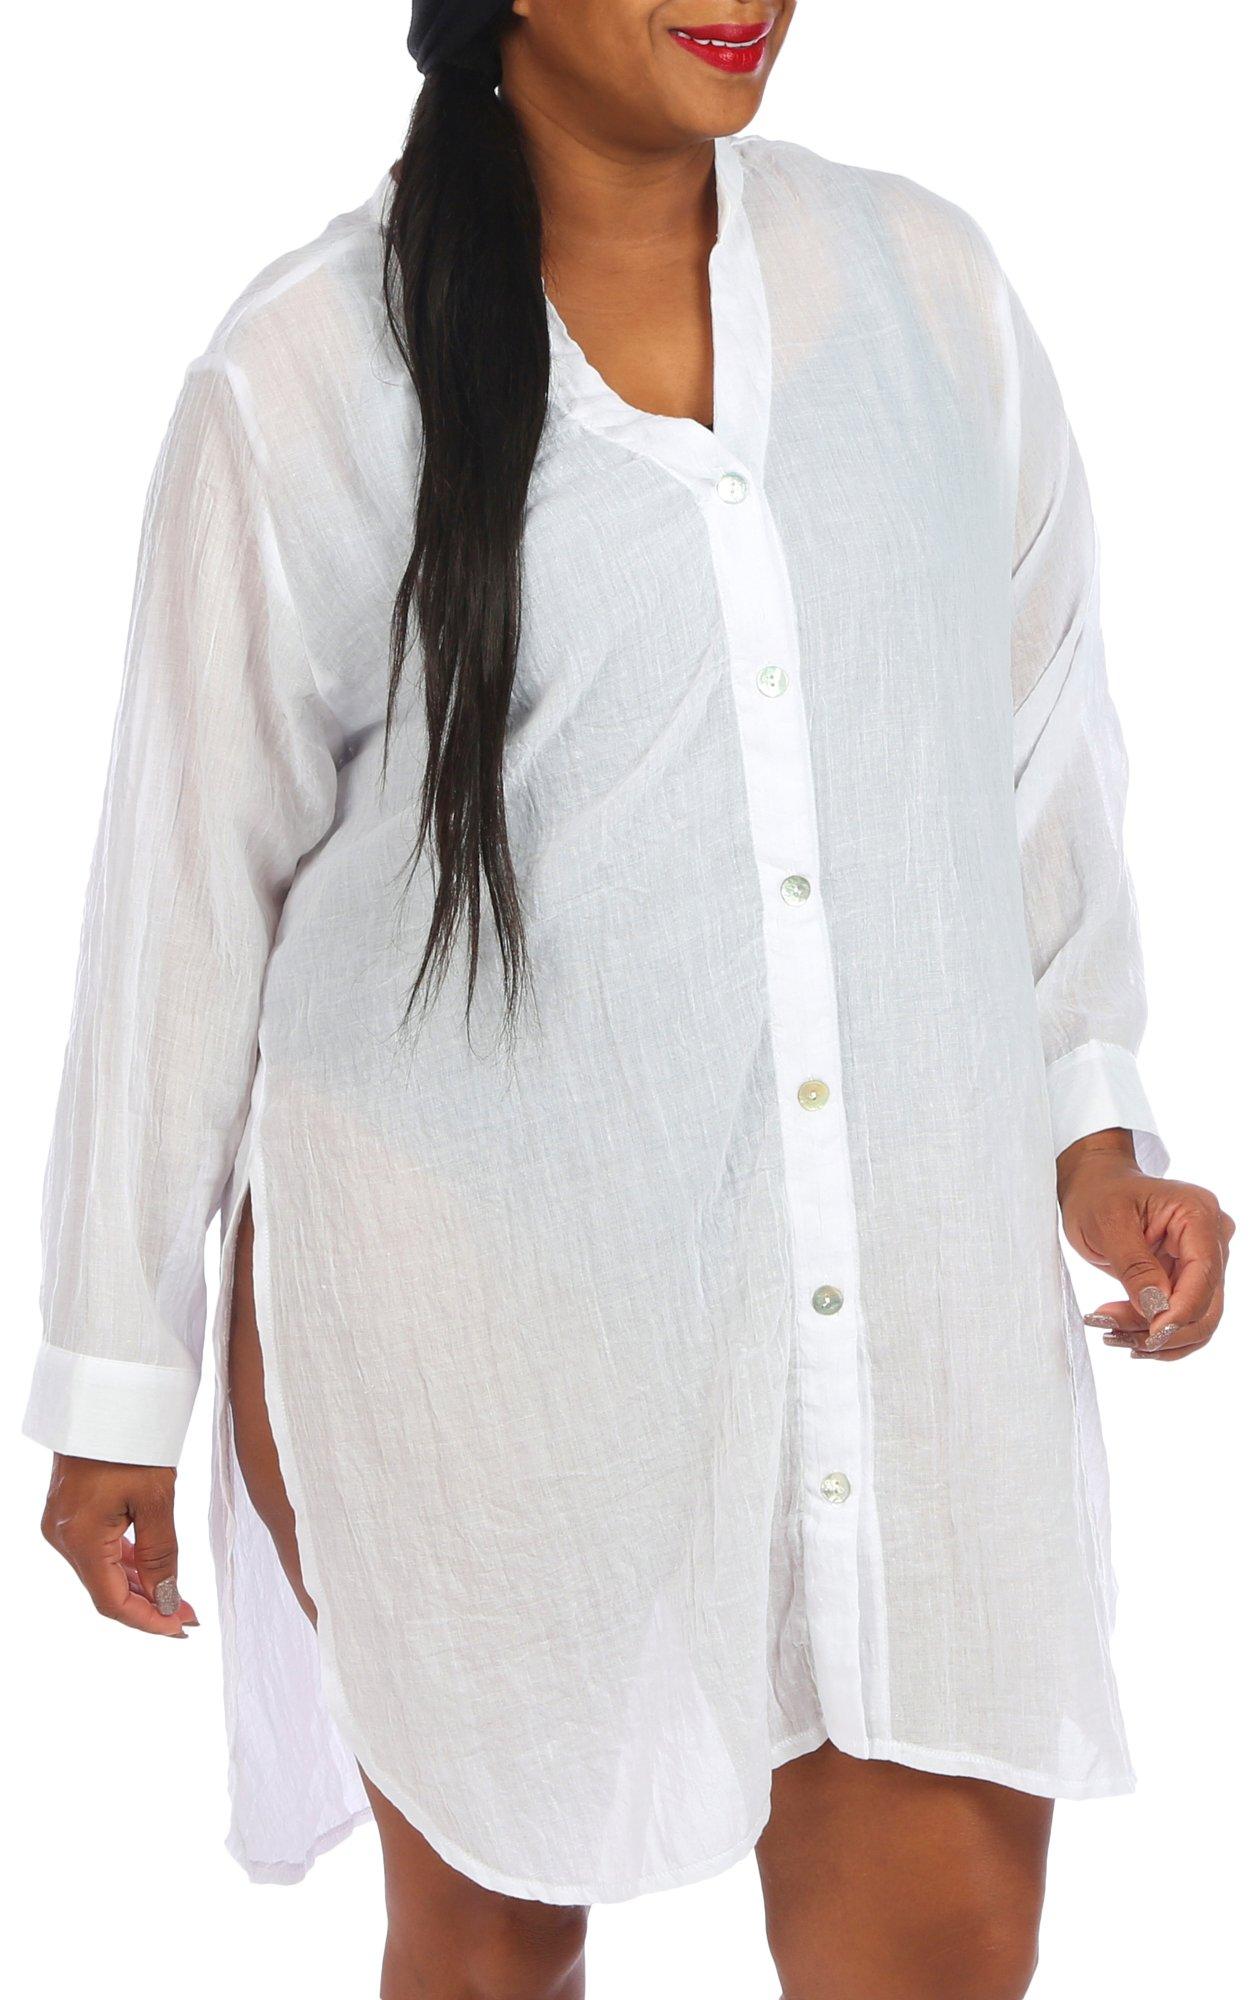 Pacific Beach Plus Solid Big Shirt Long Sleeve Coverup